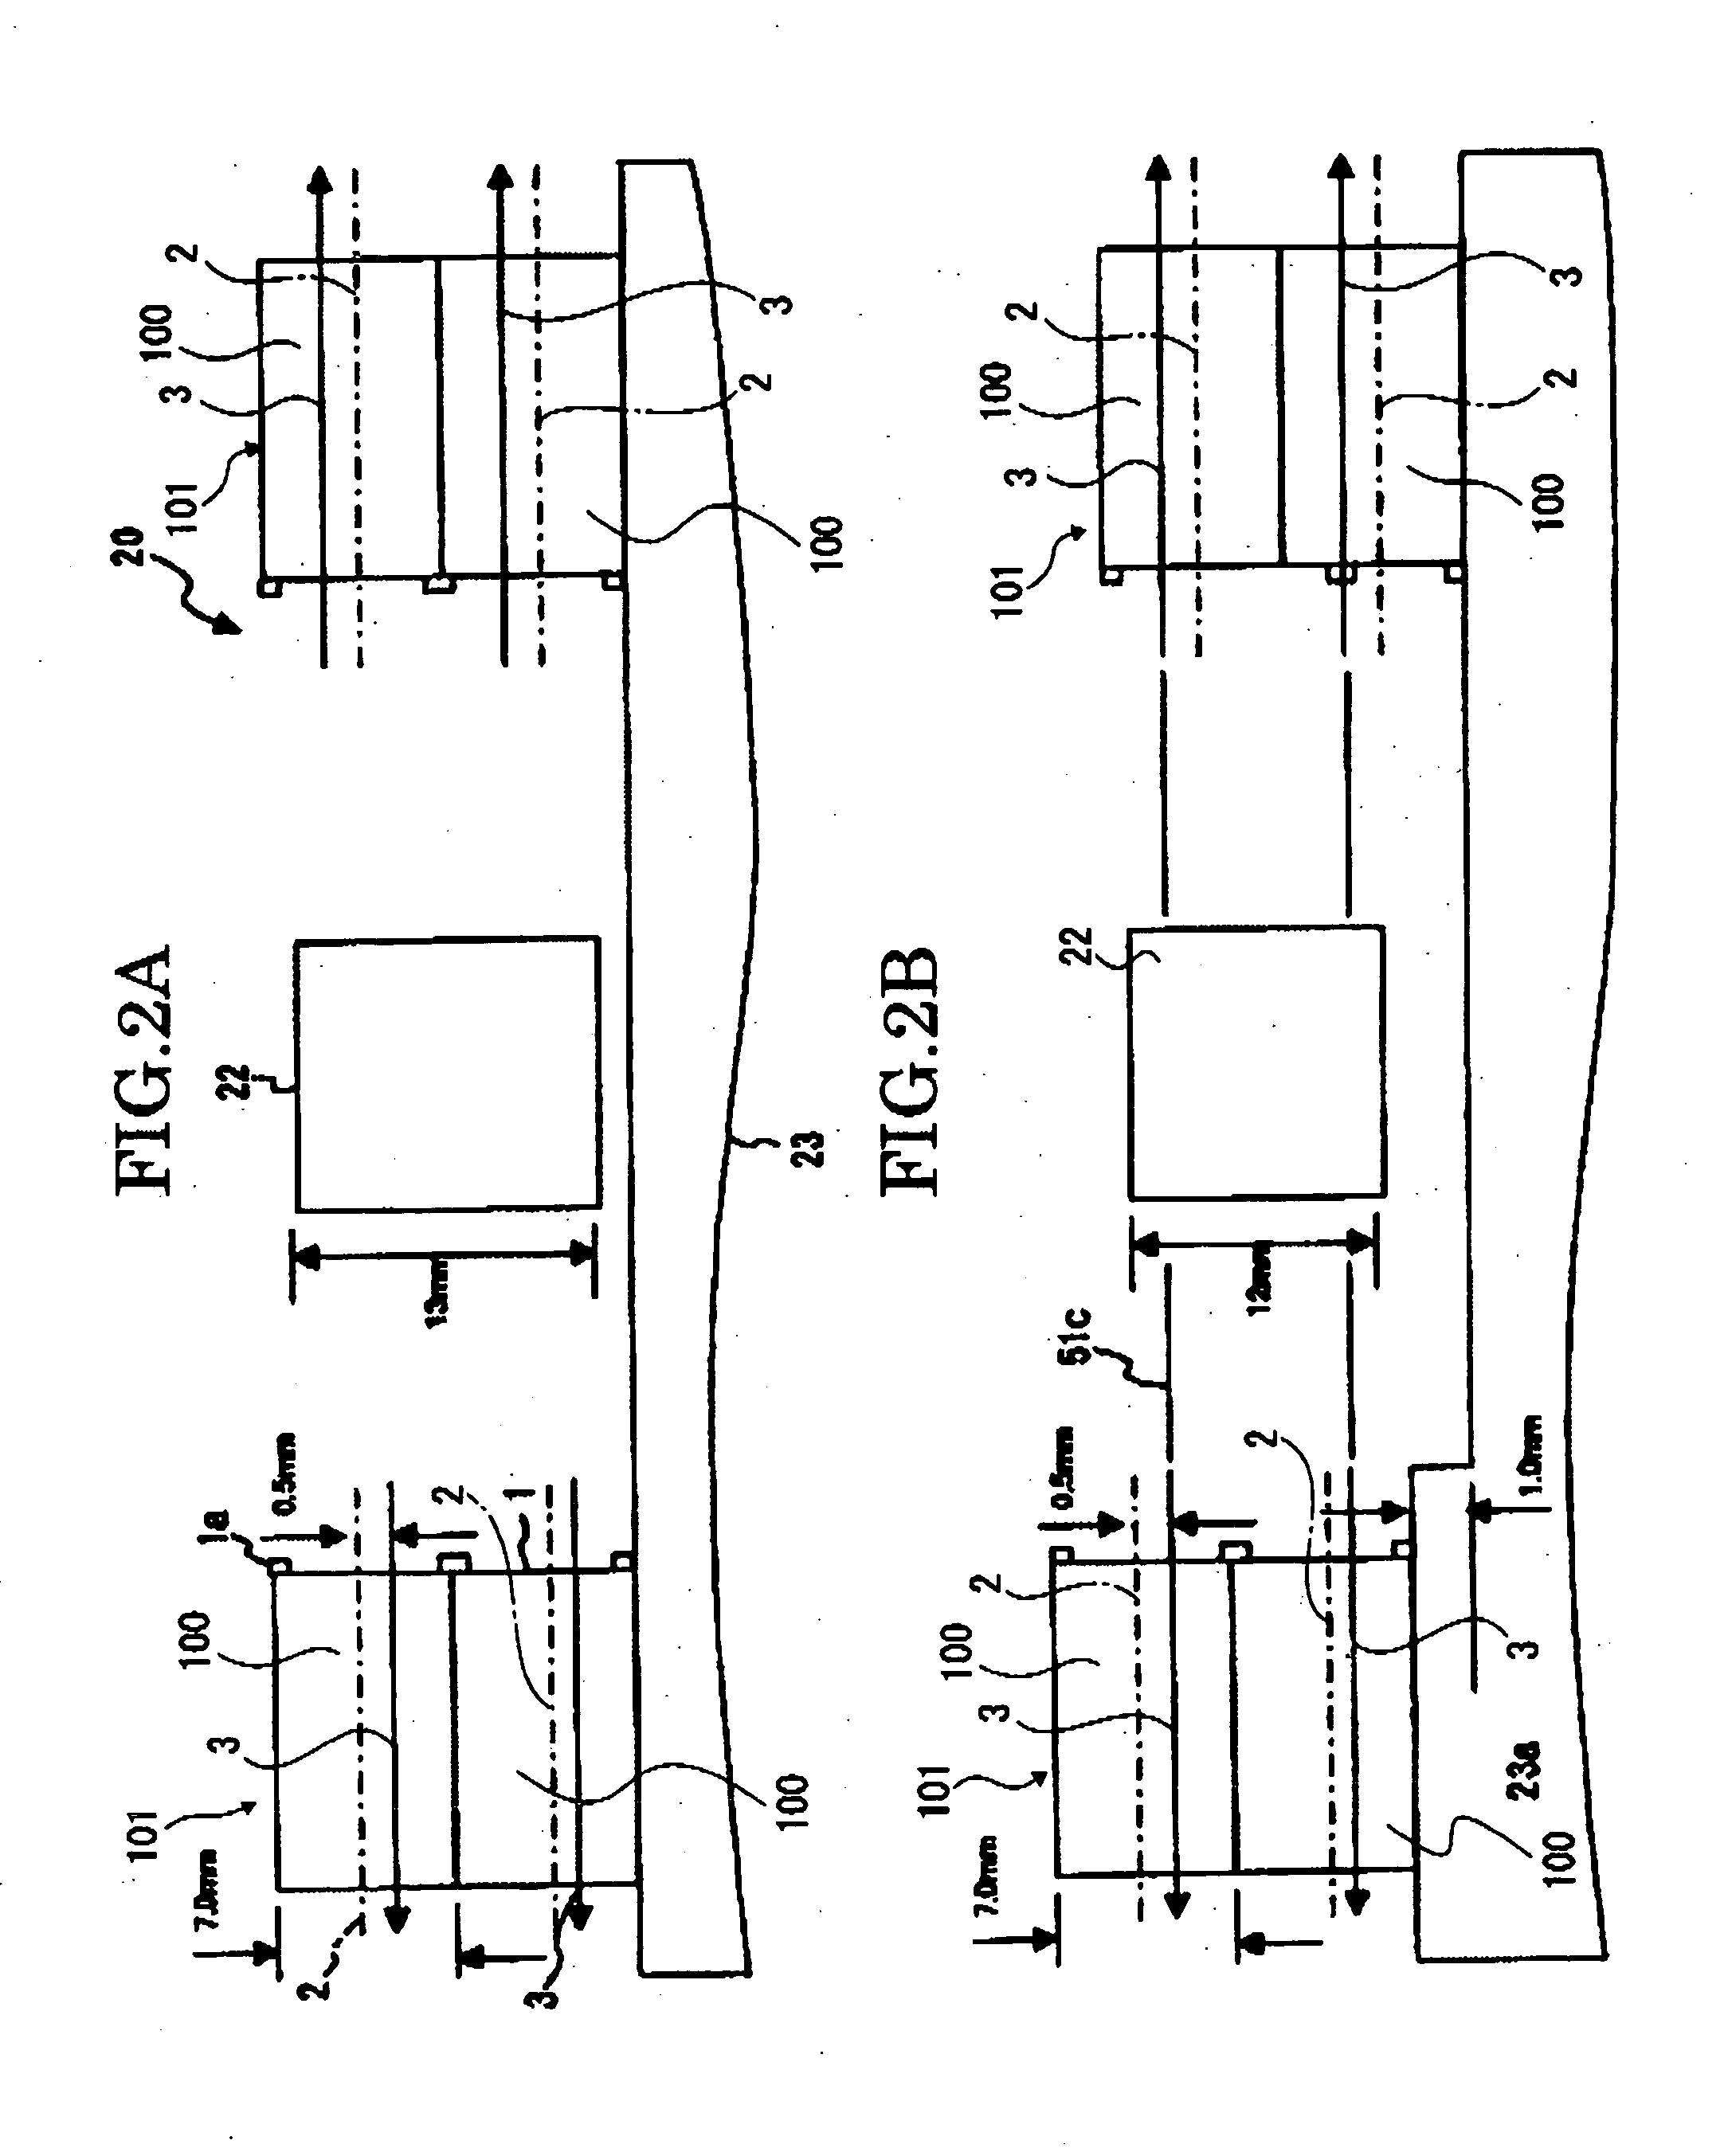 Plastic optical element, mold for forming the plastic optical element, light scanning device and image forming apparatus having the light scanning device